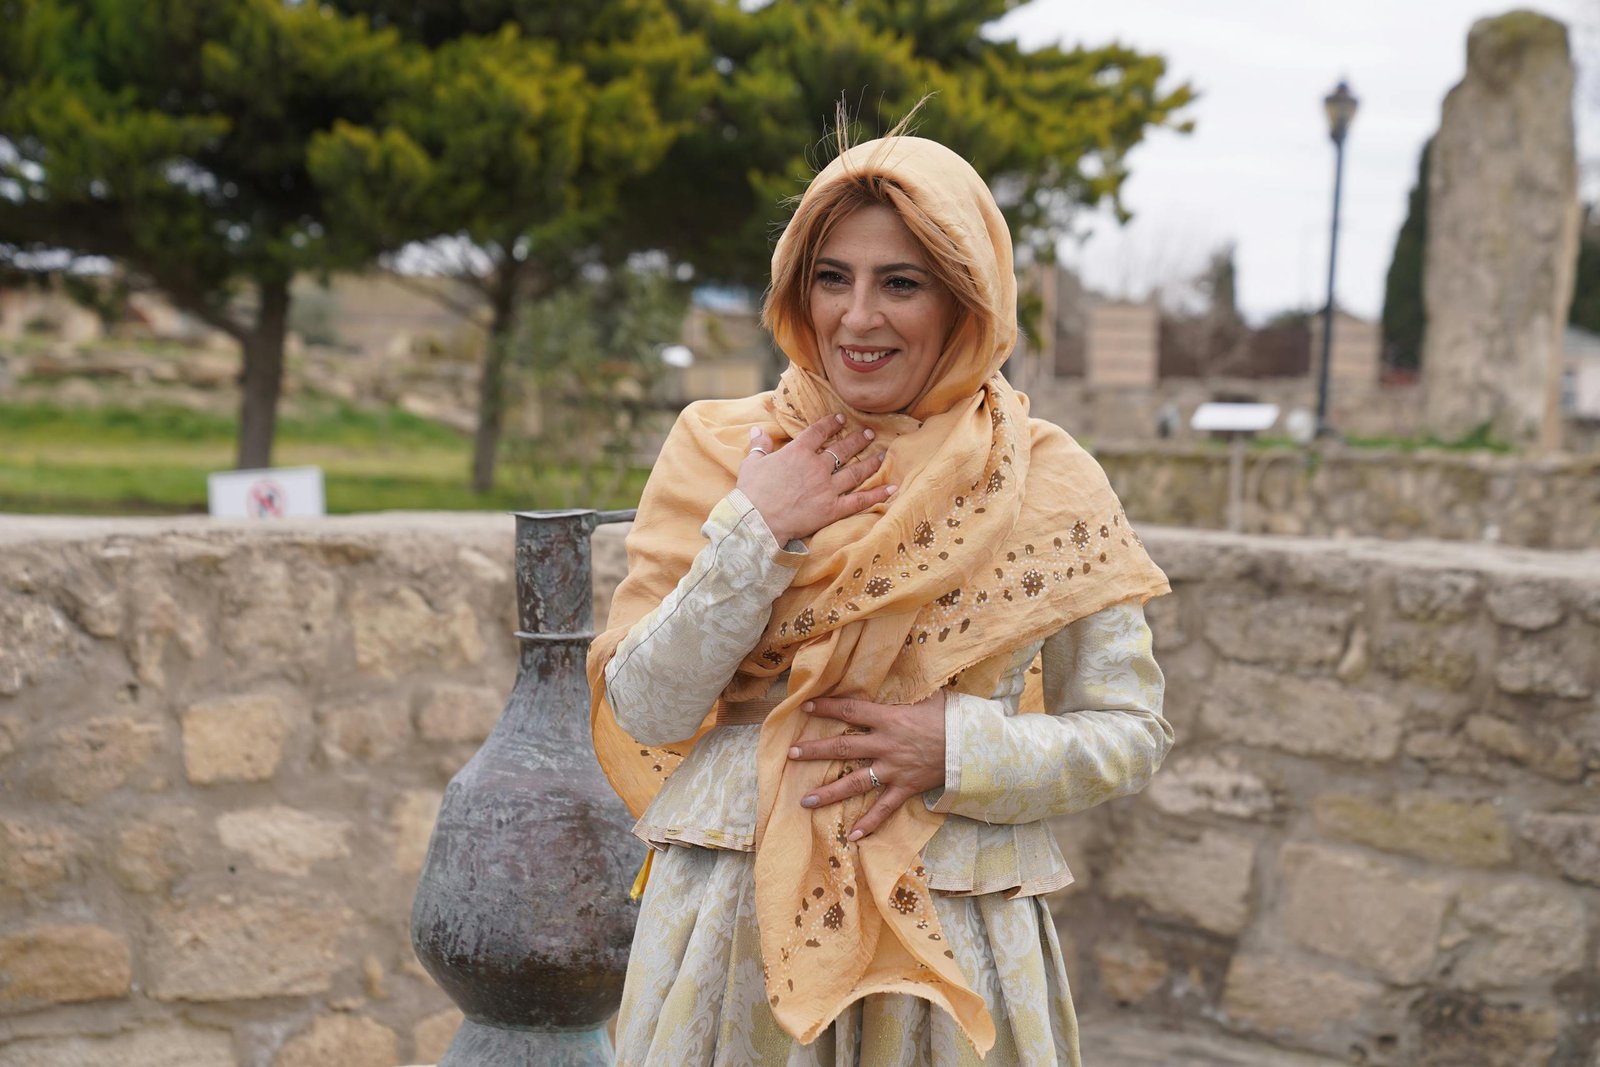 A woman in a traditional turkish dress